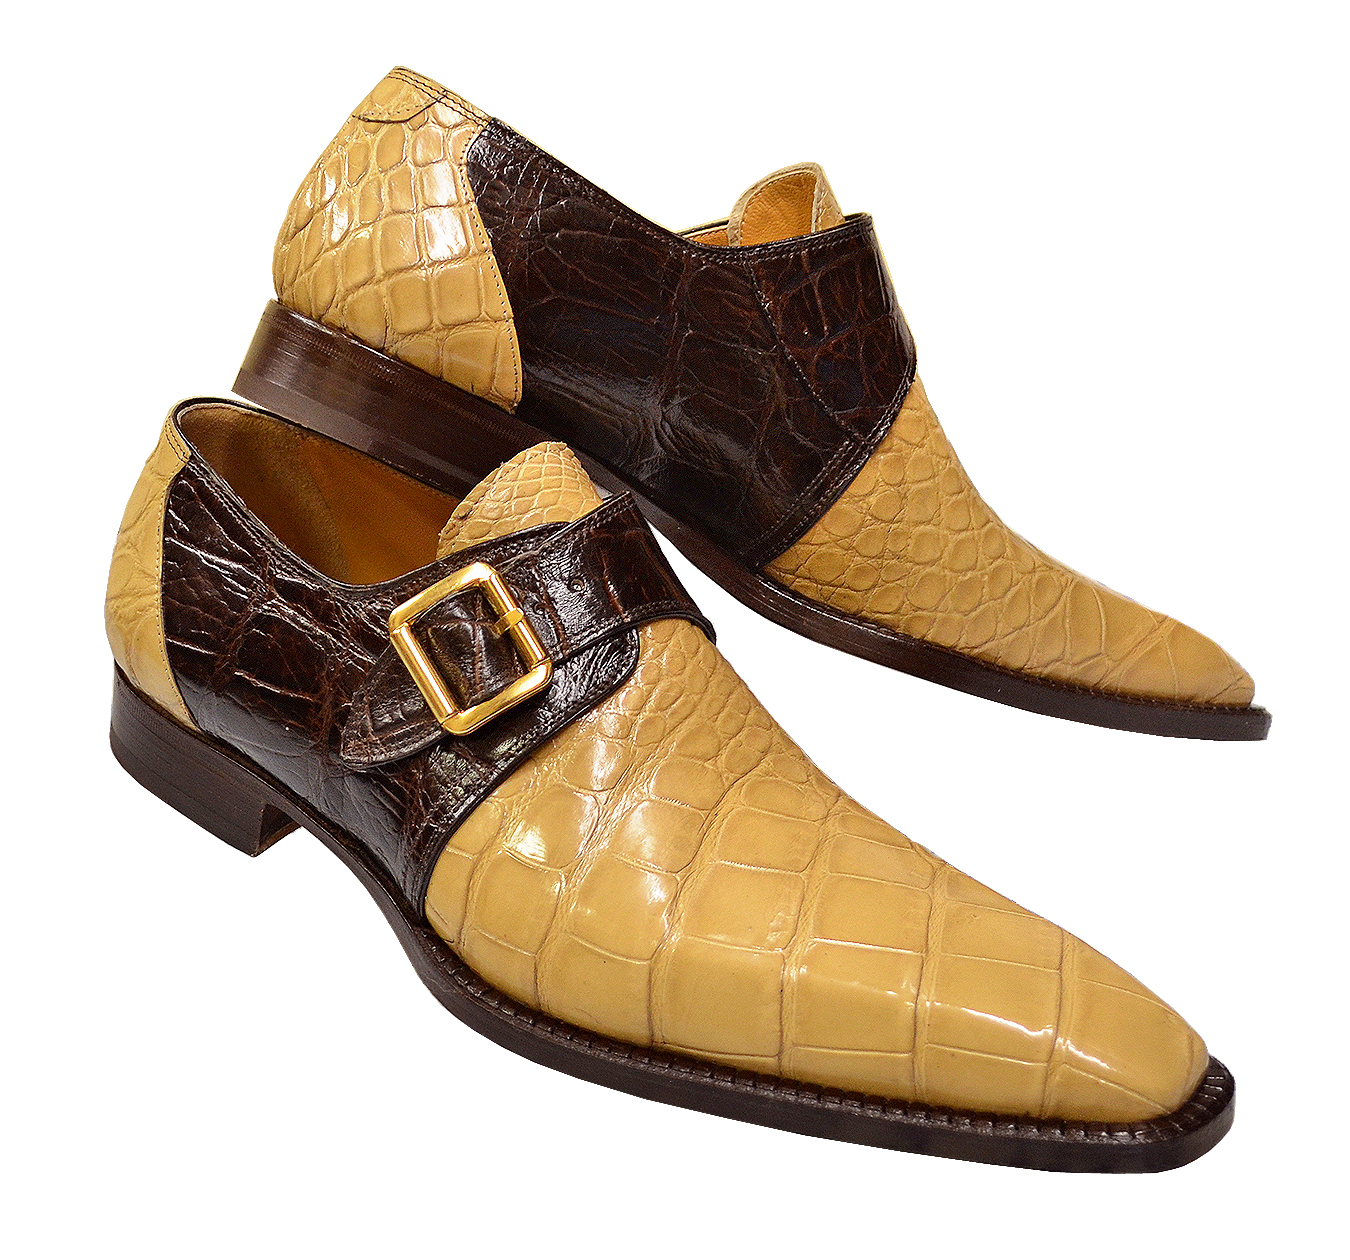 Mauri 53154 Sport Rust / Bone Genuine All-Over Alligator Loafer Shoes With Monk Straps.